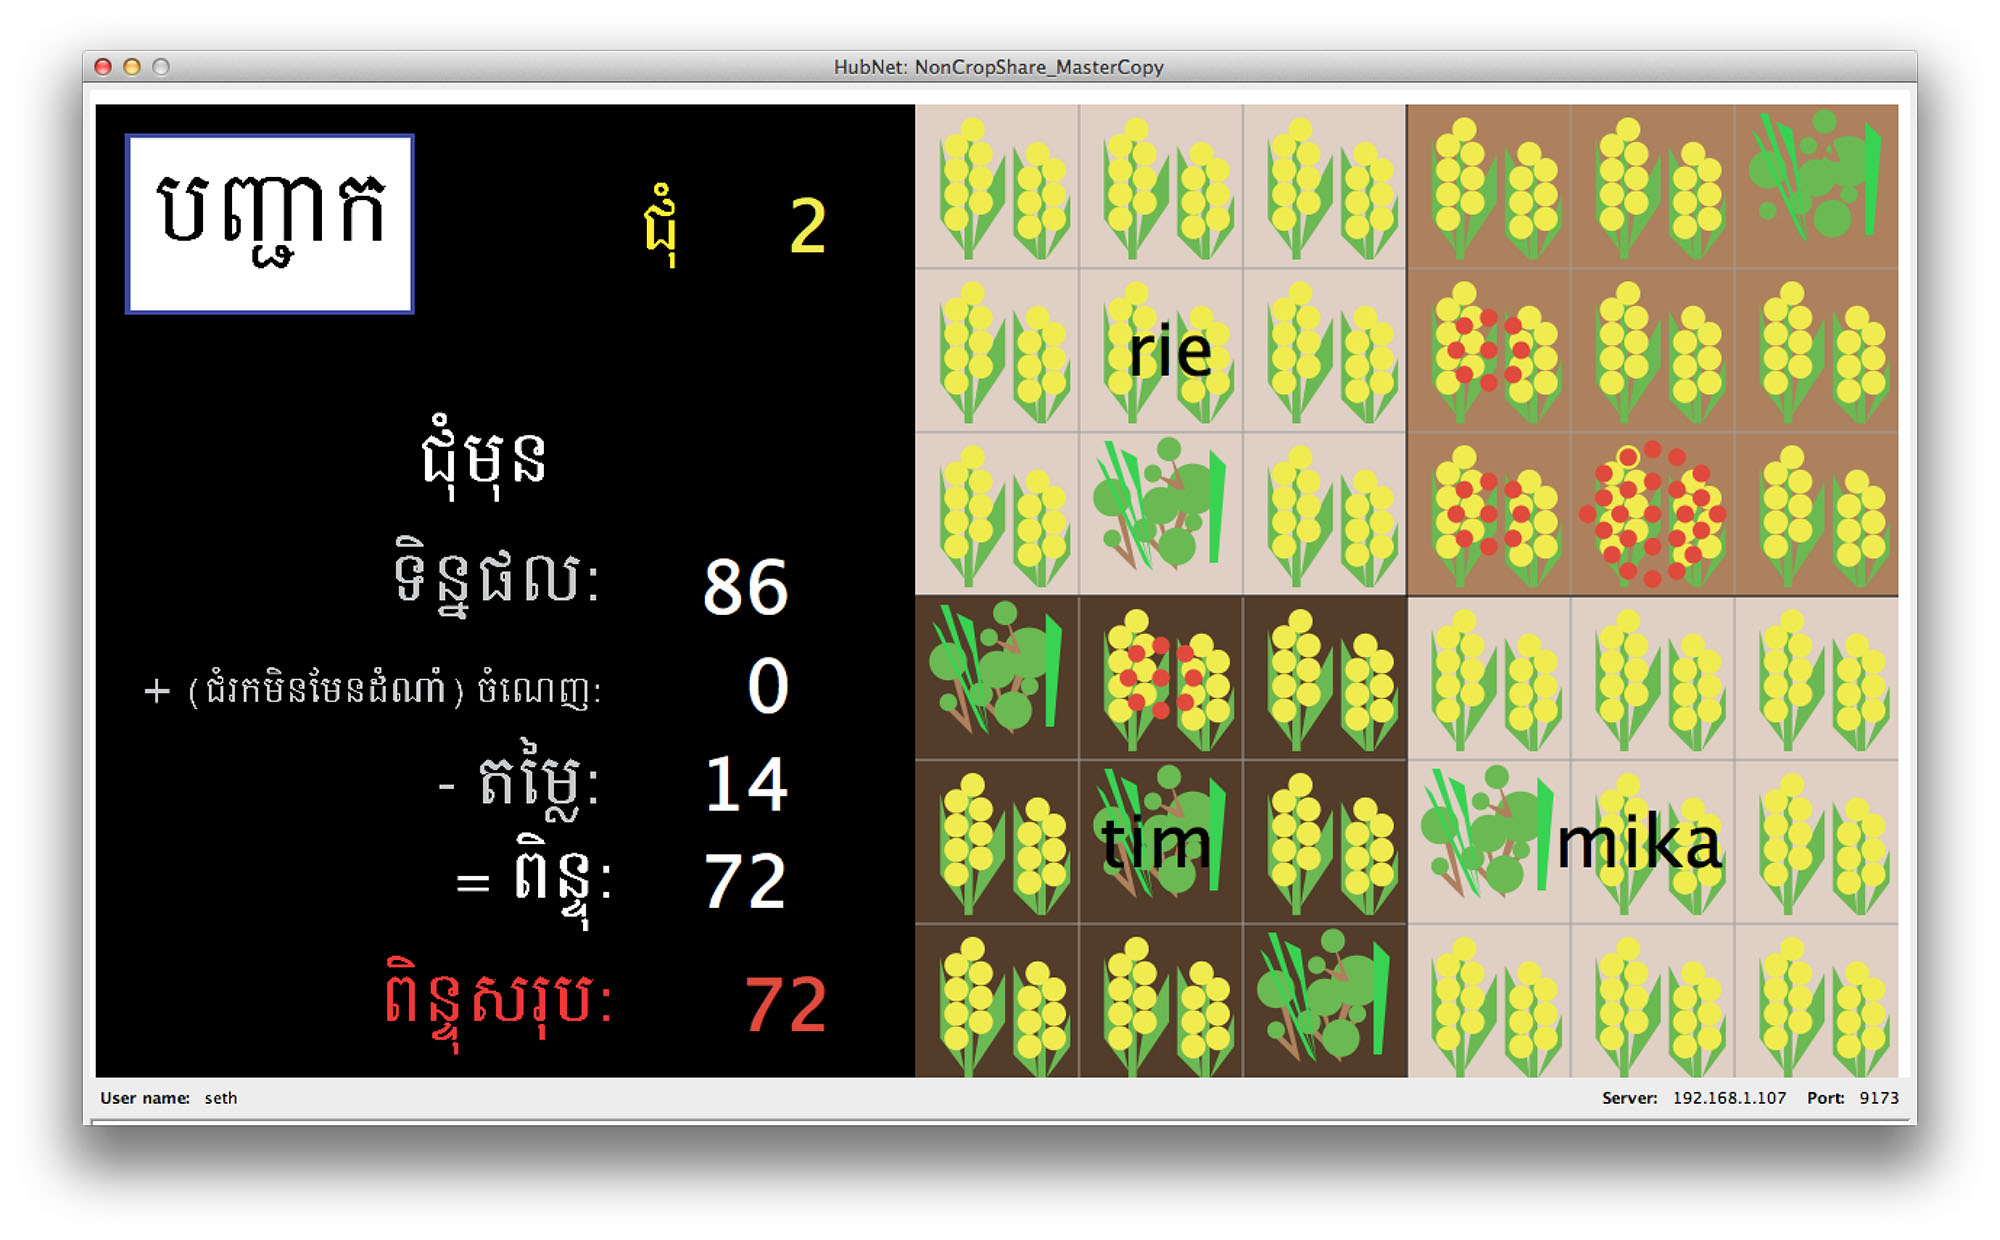 Screenshot of the video game NonCropShare. A screen shows vector illustrations of corn crops in square fields to the right. On the left, a black screen shows stats and numbers for the game in Cambodian.